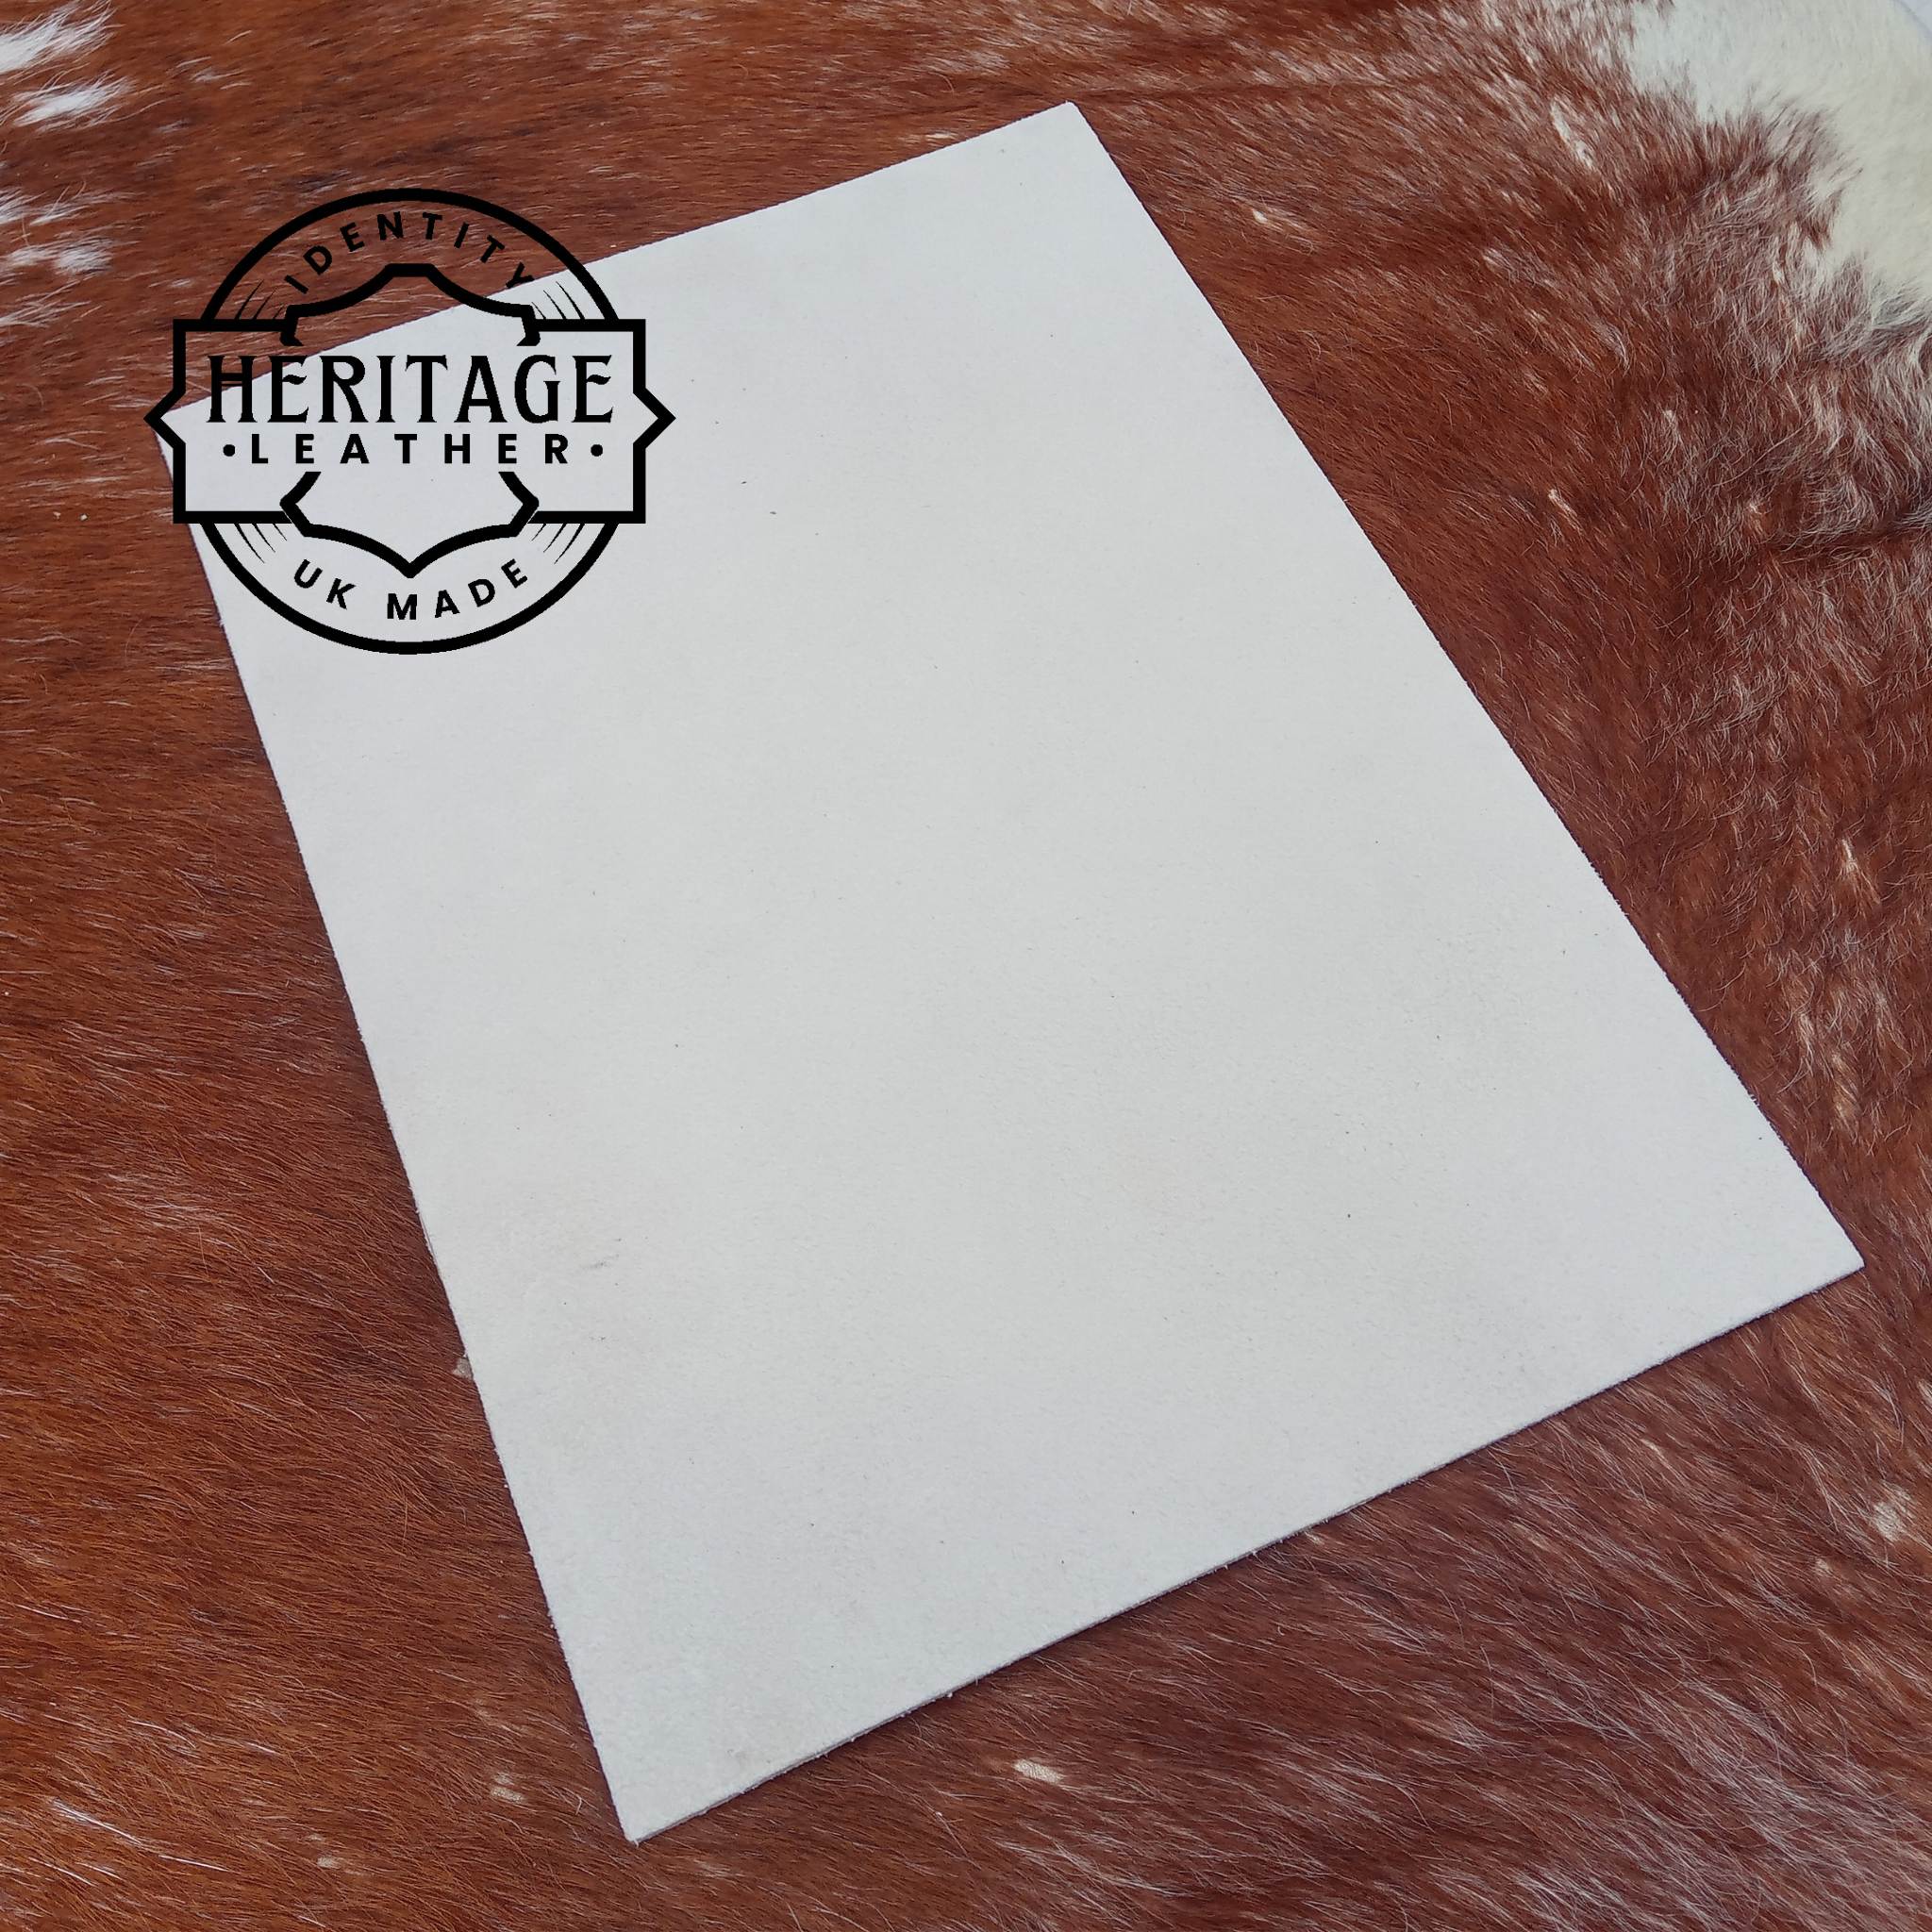 Part of our new Heritage Leather collection - we now have in stock the speciality alum tanned white leather typically used for Napleonic re-enactment at bargain prices.